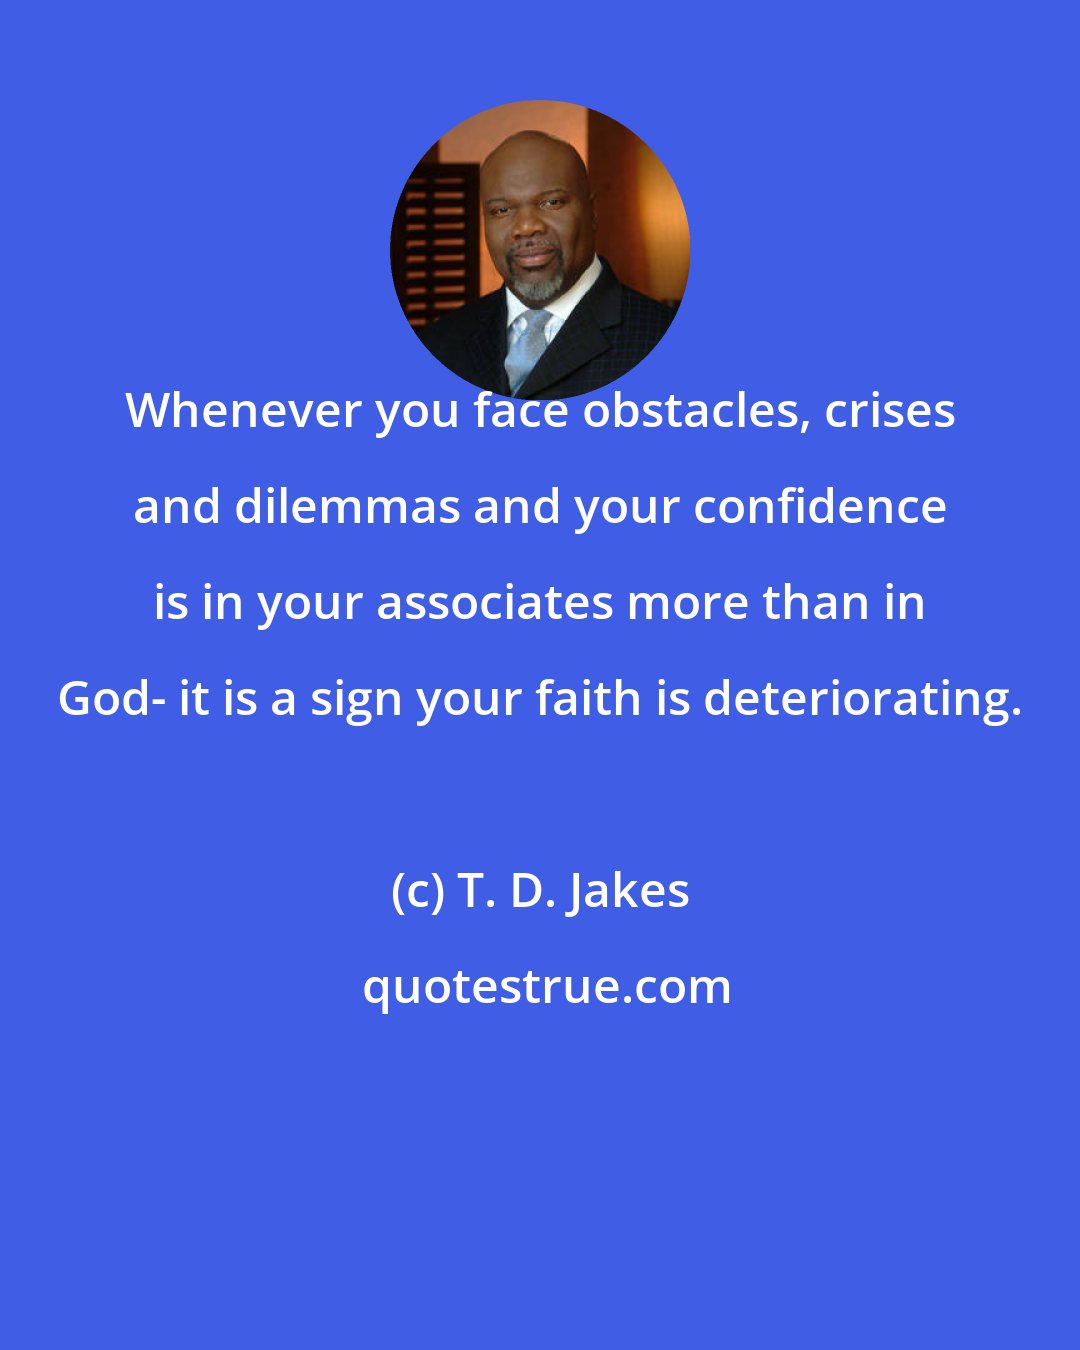 T. D. Jakes: Whenever you face obstacles, crises and dilemmas and your confidence is in your associates more than in God- it is a sign your faith is deteriorating.